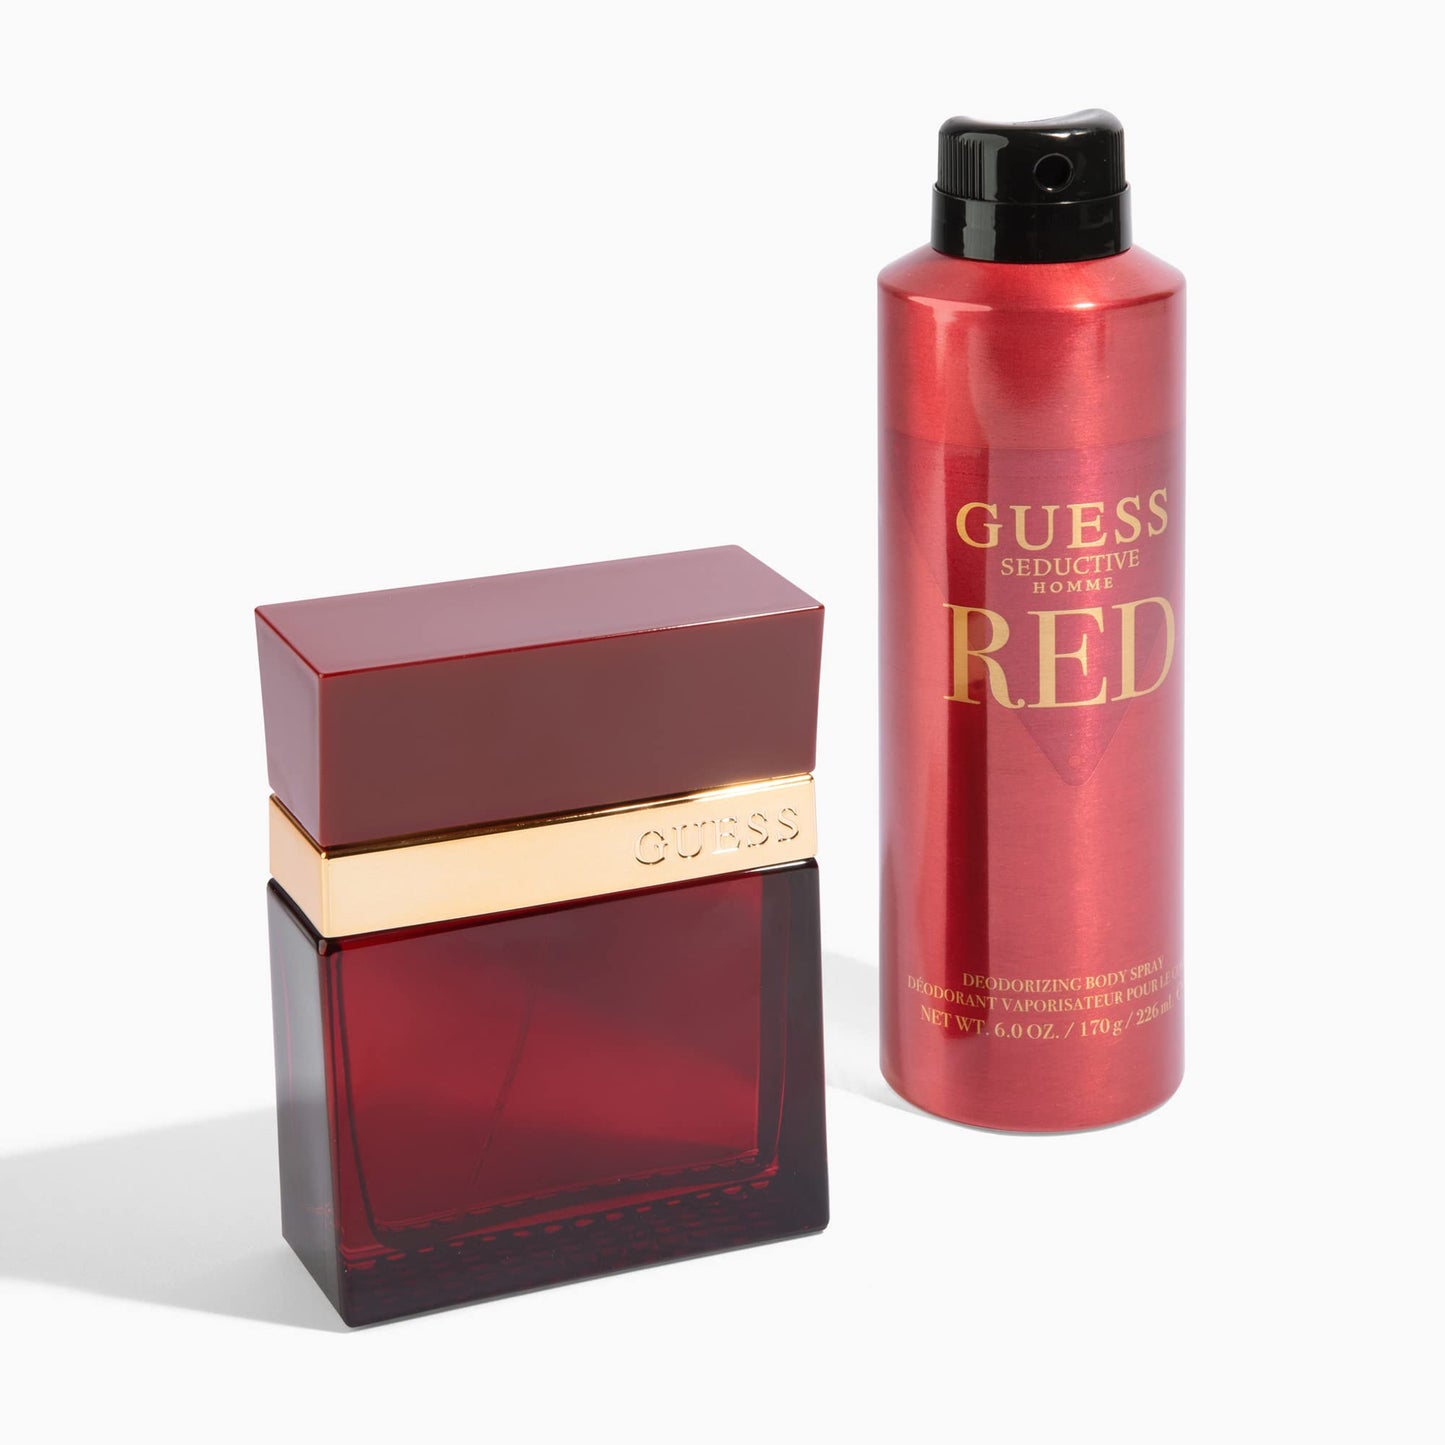 Guess Seductive Homme Red Body Spray 177ml